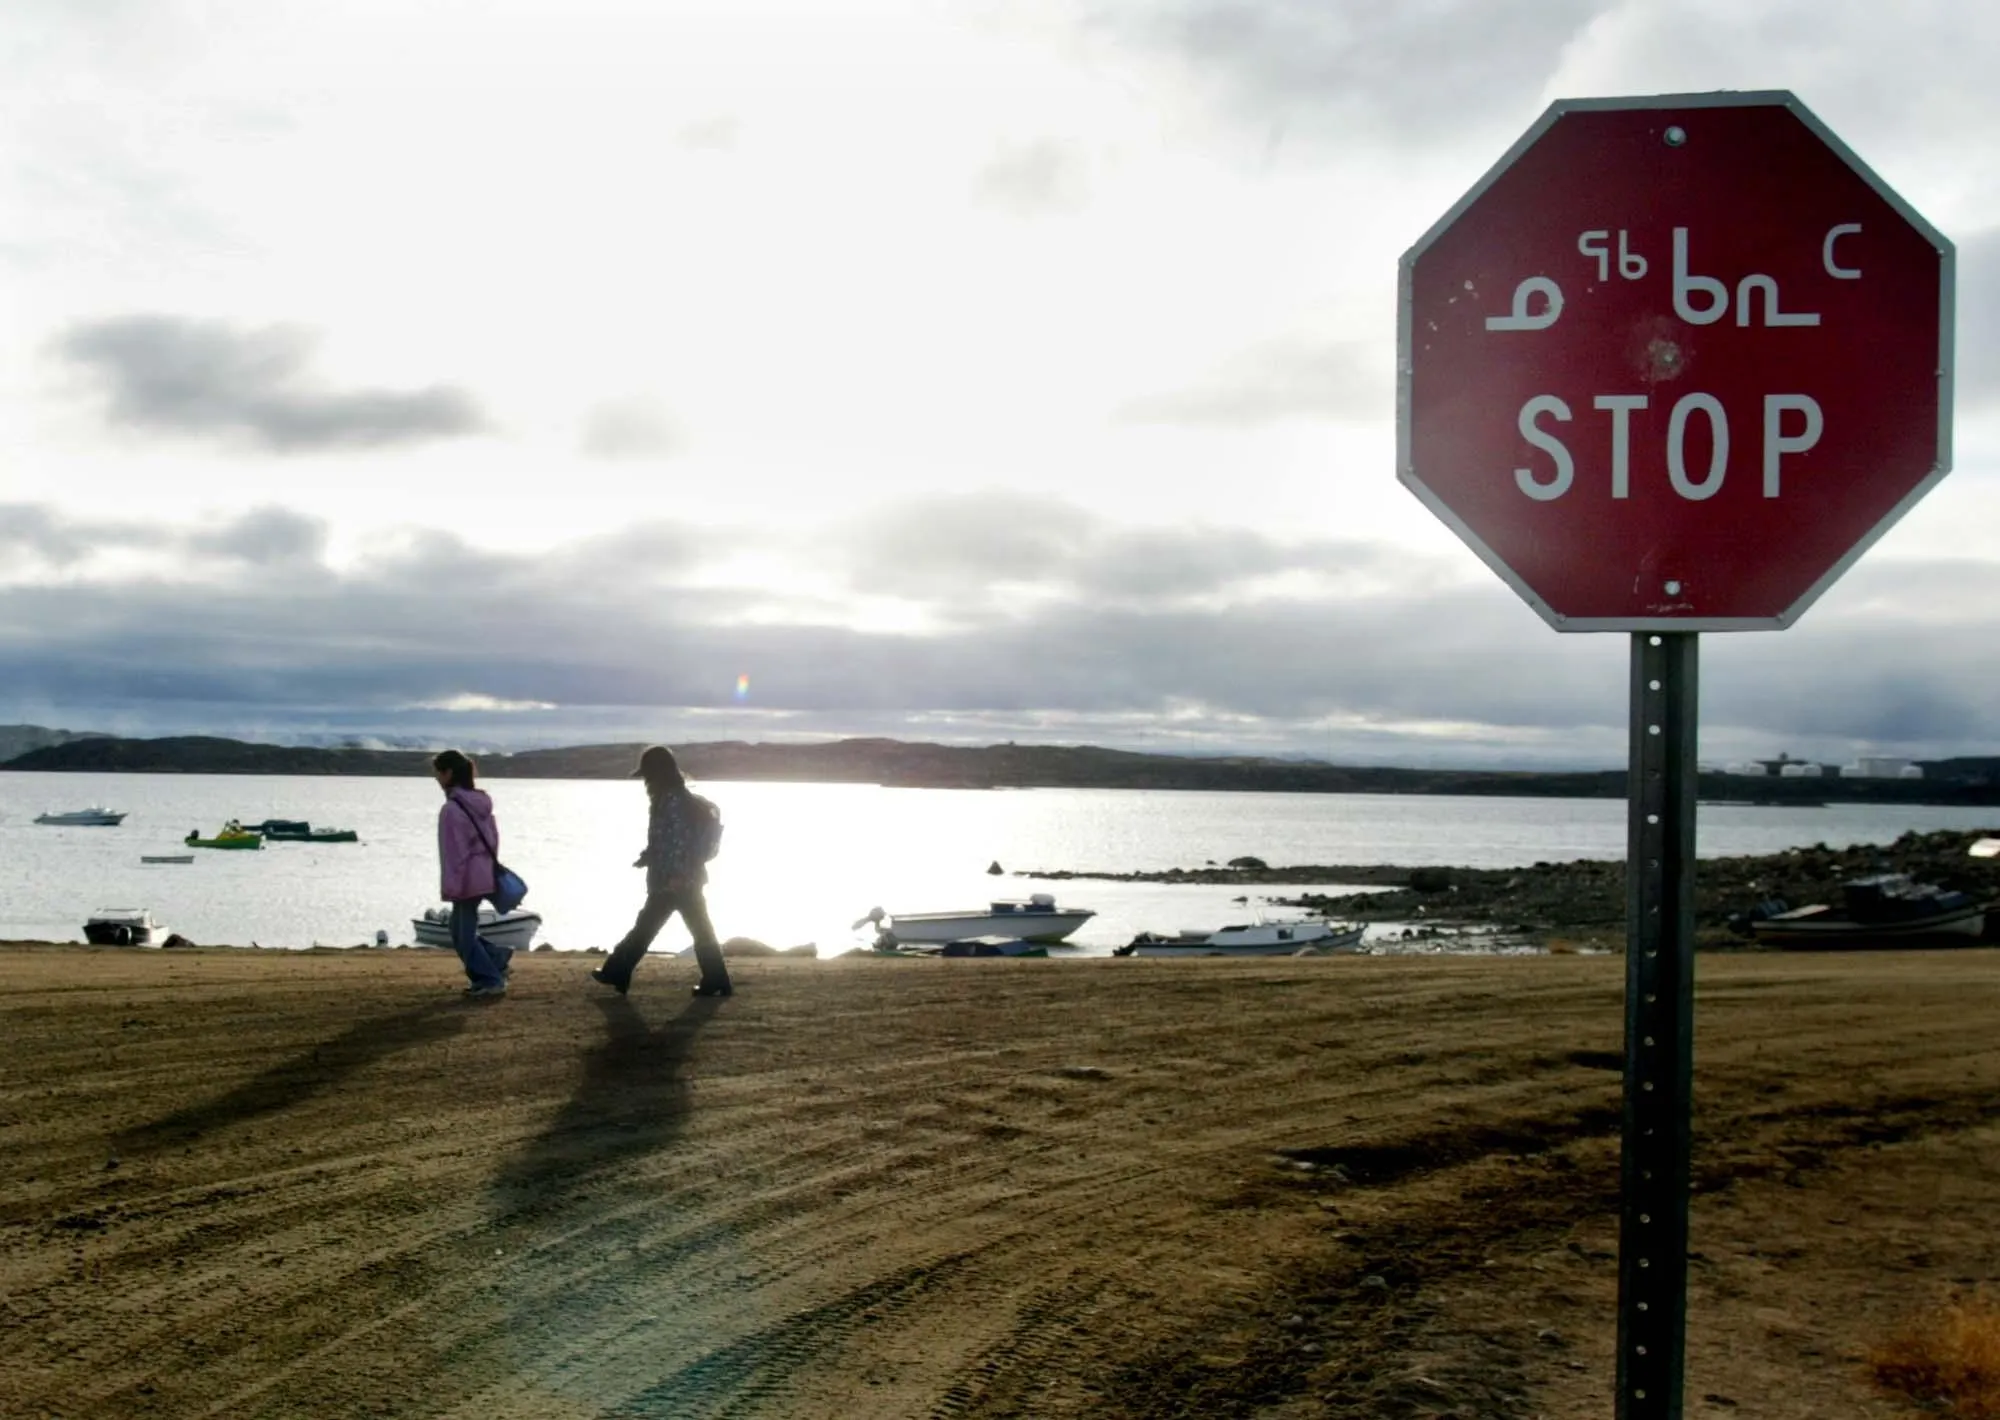 Two Inuit children return from school past a stop sign written in English in October 2002 in Iqaluit, northern Canada. Iqaluit is the capitol of Nunavut Territory in the Canadian Arctic.?w=200&h=150